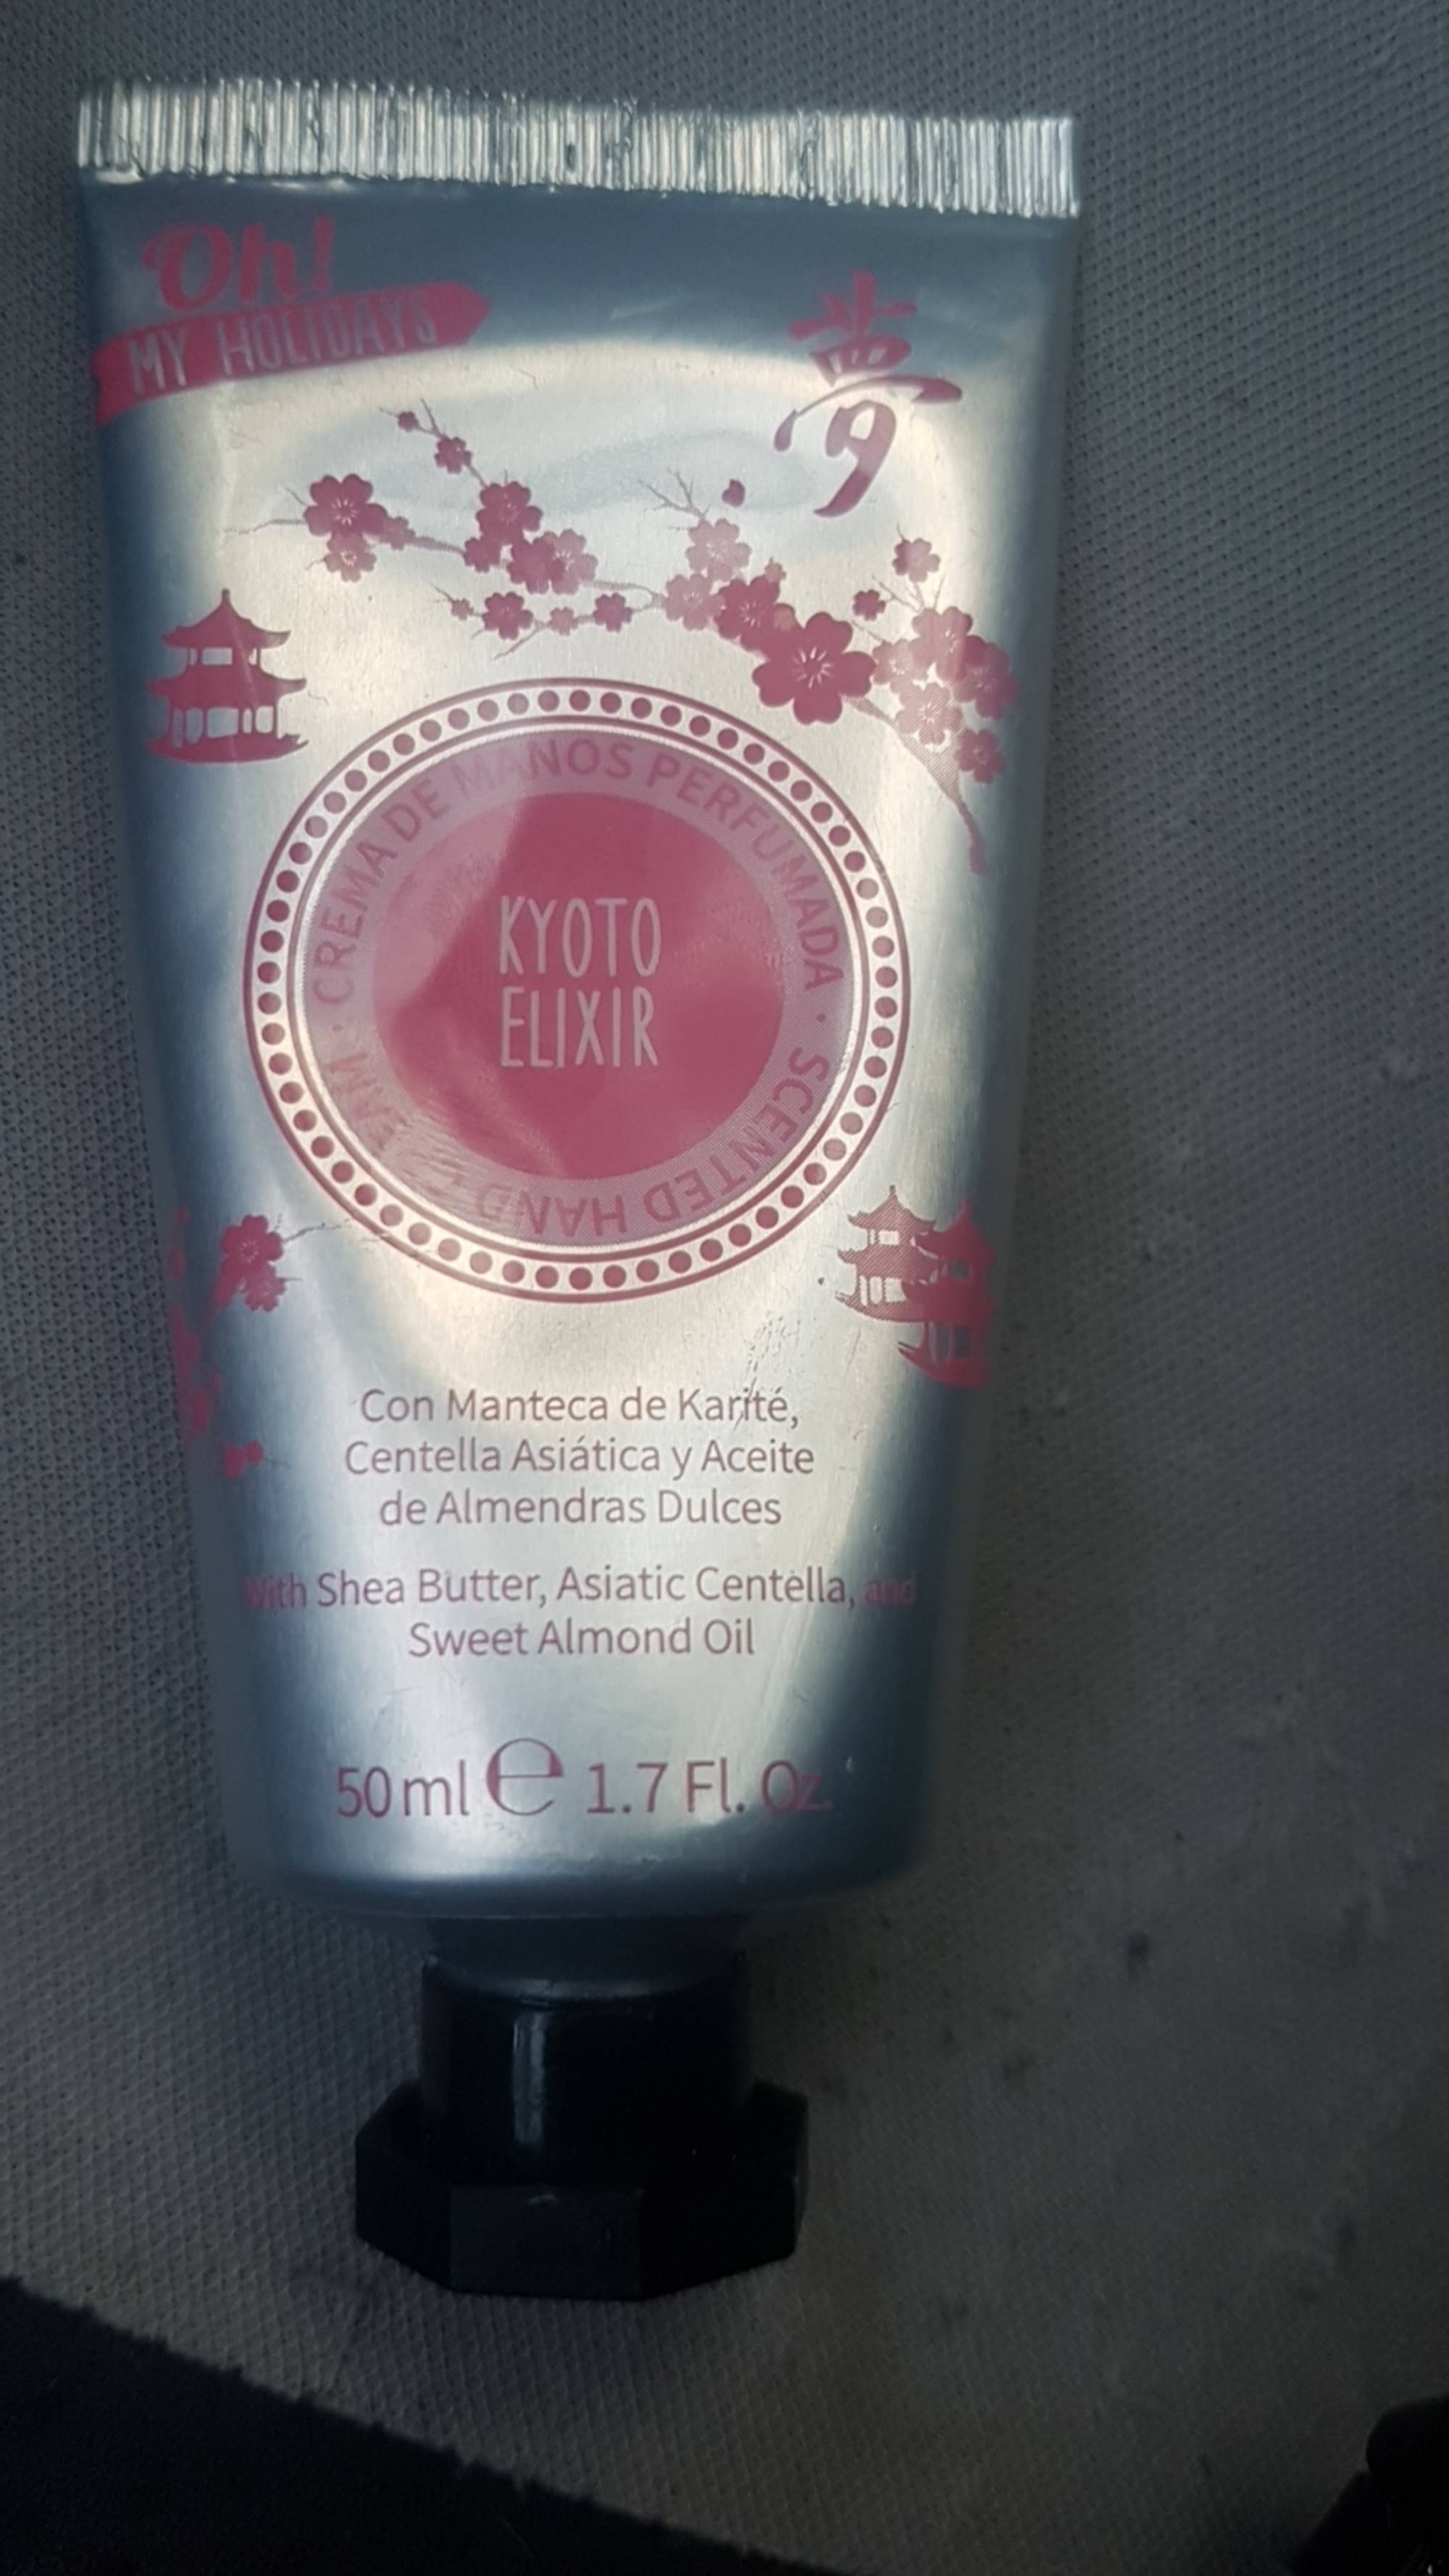 EQUIVALENZA - Oh! my holidays  - Scented hand cream kyoto elixir